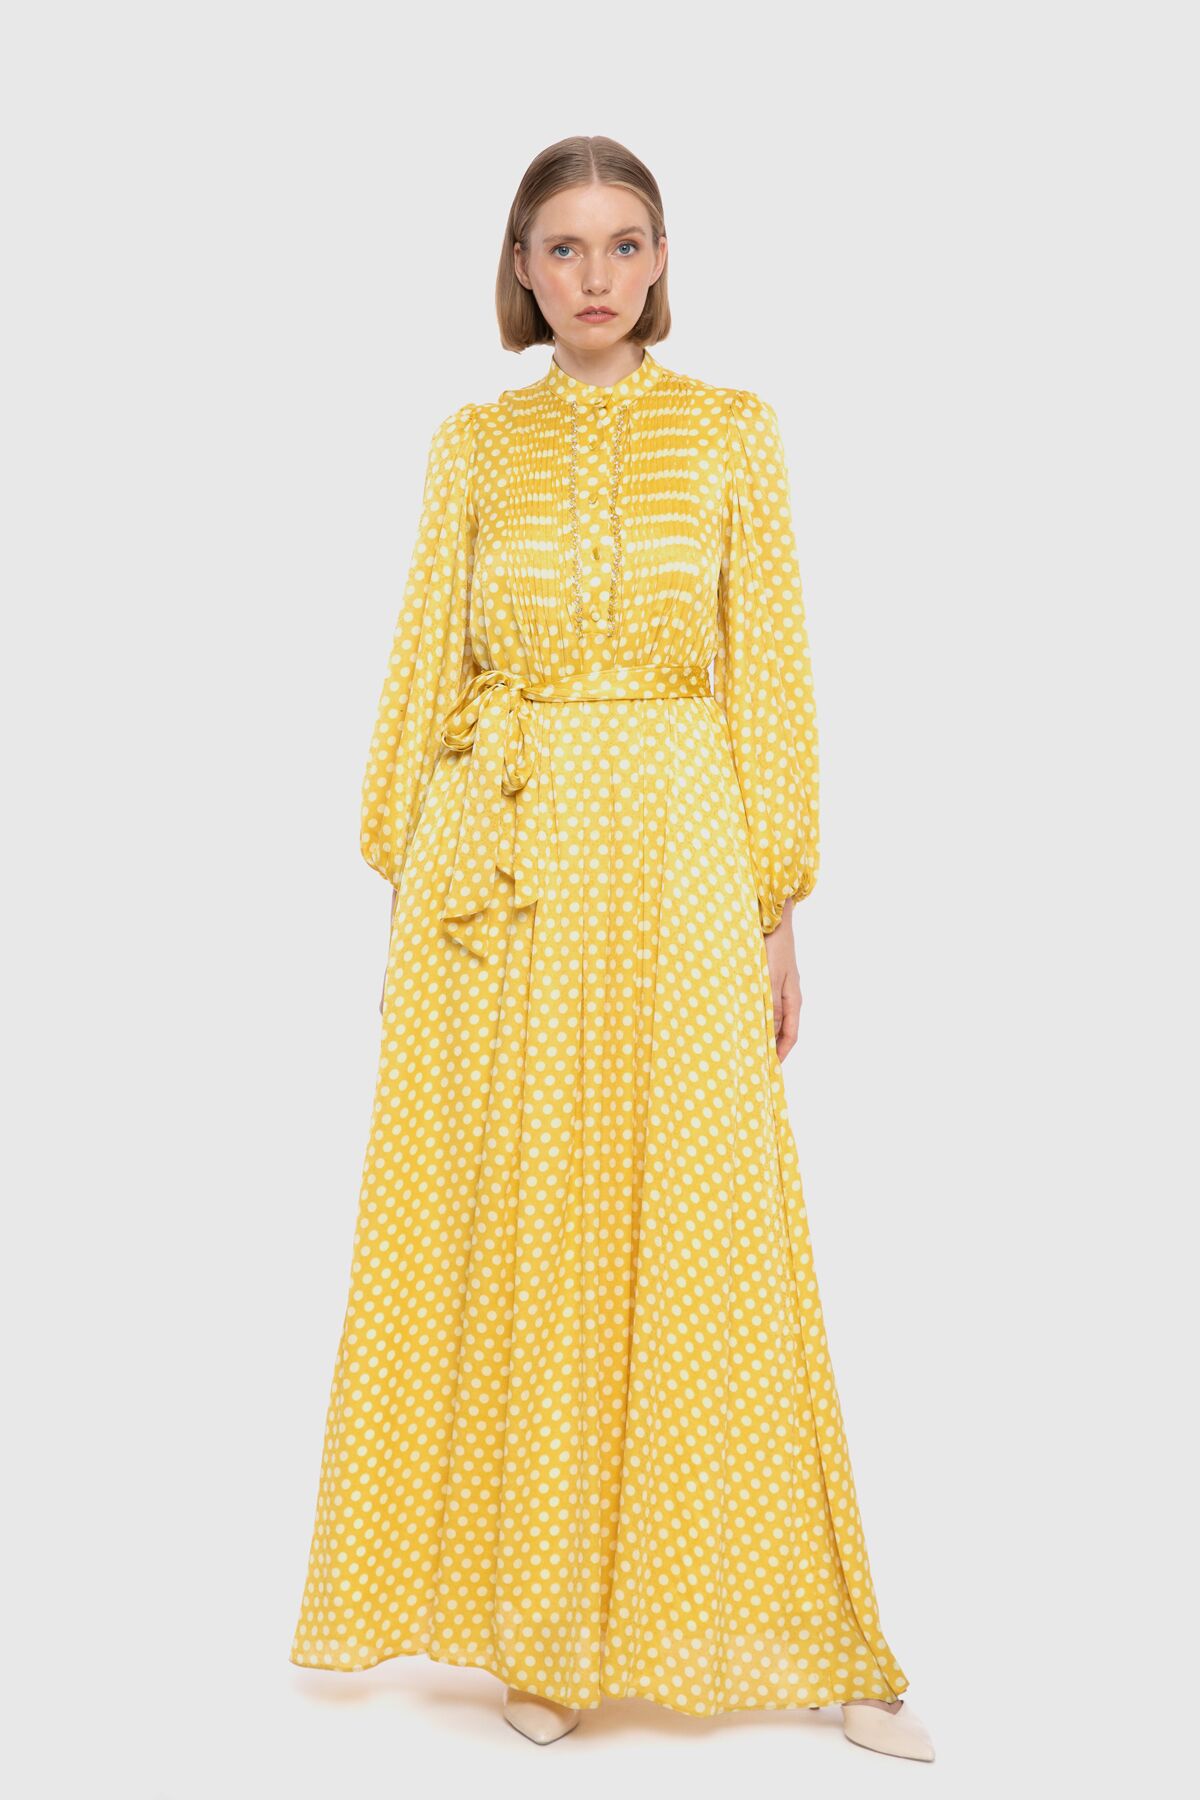  GIZIA - With Pleat Detail On The Front Long Polka Dot Patterned Yellow Dress